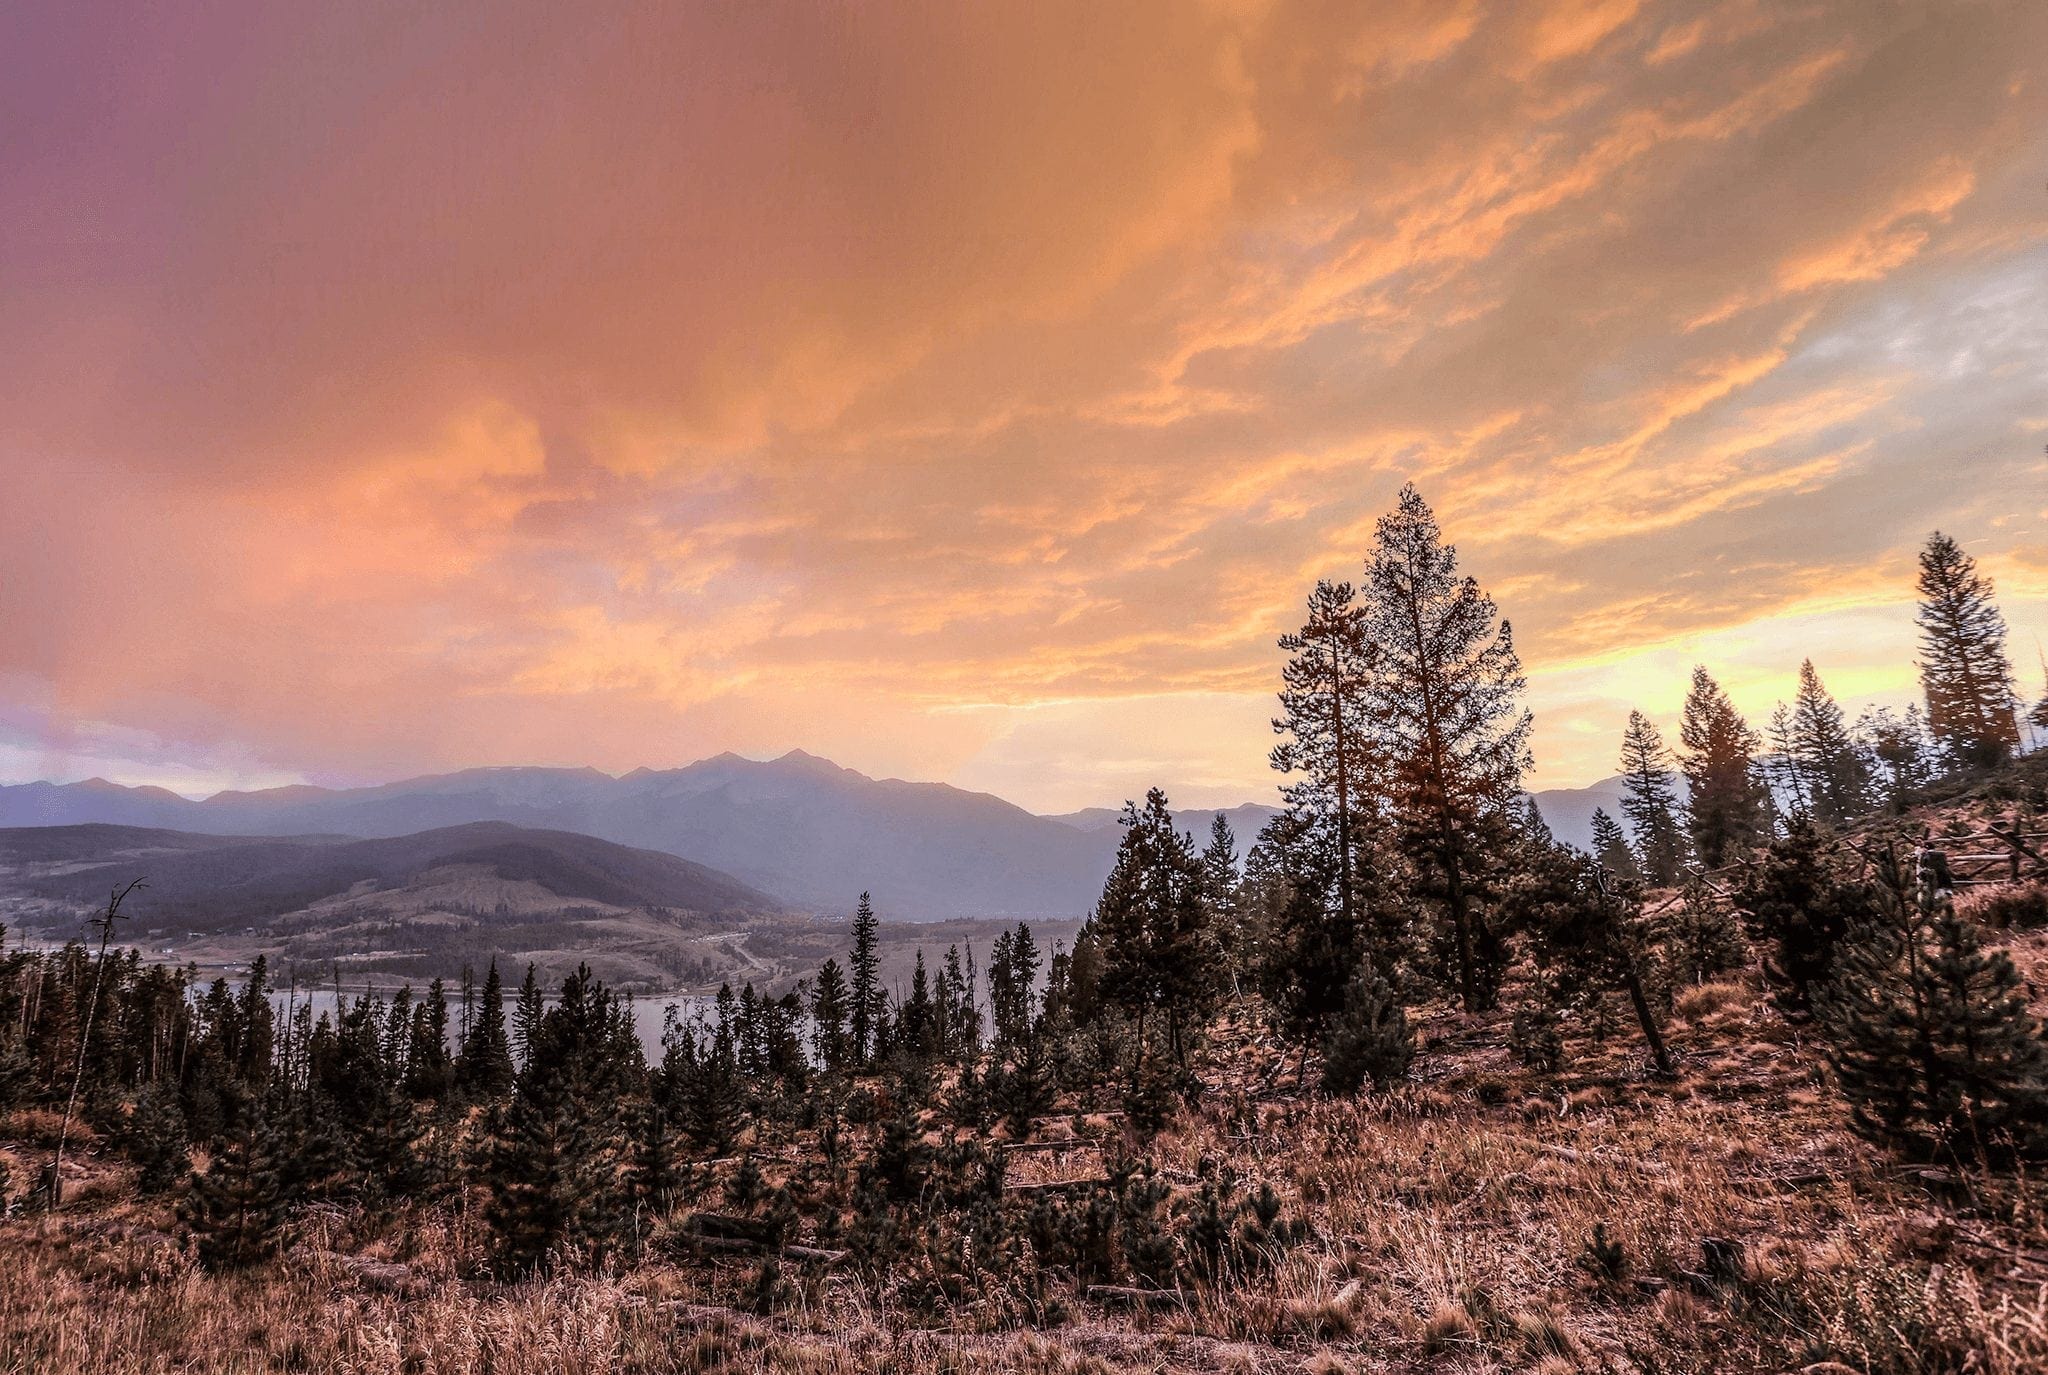 Sunset view from the Sapphire Point Loop, one of the easy hiking trails in Breckenridge.